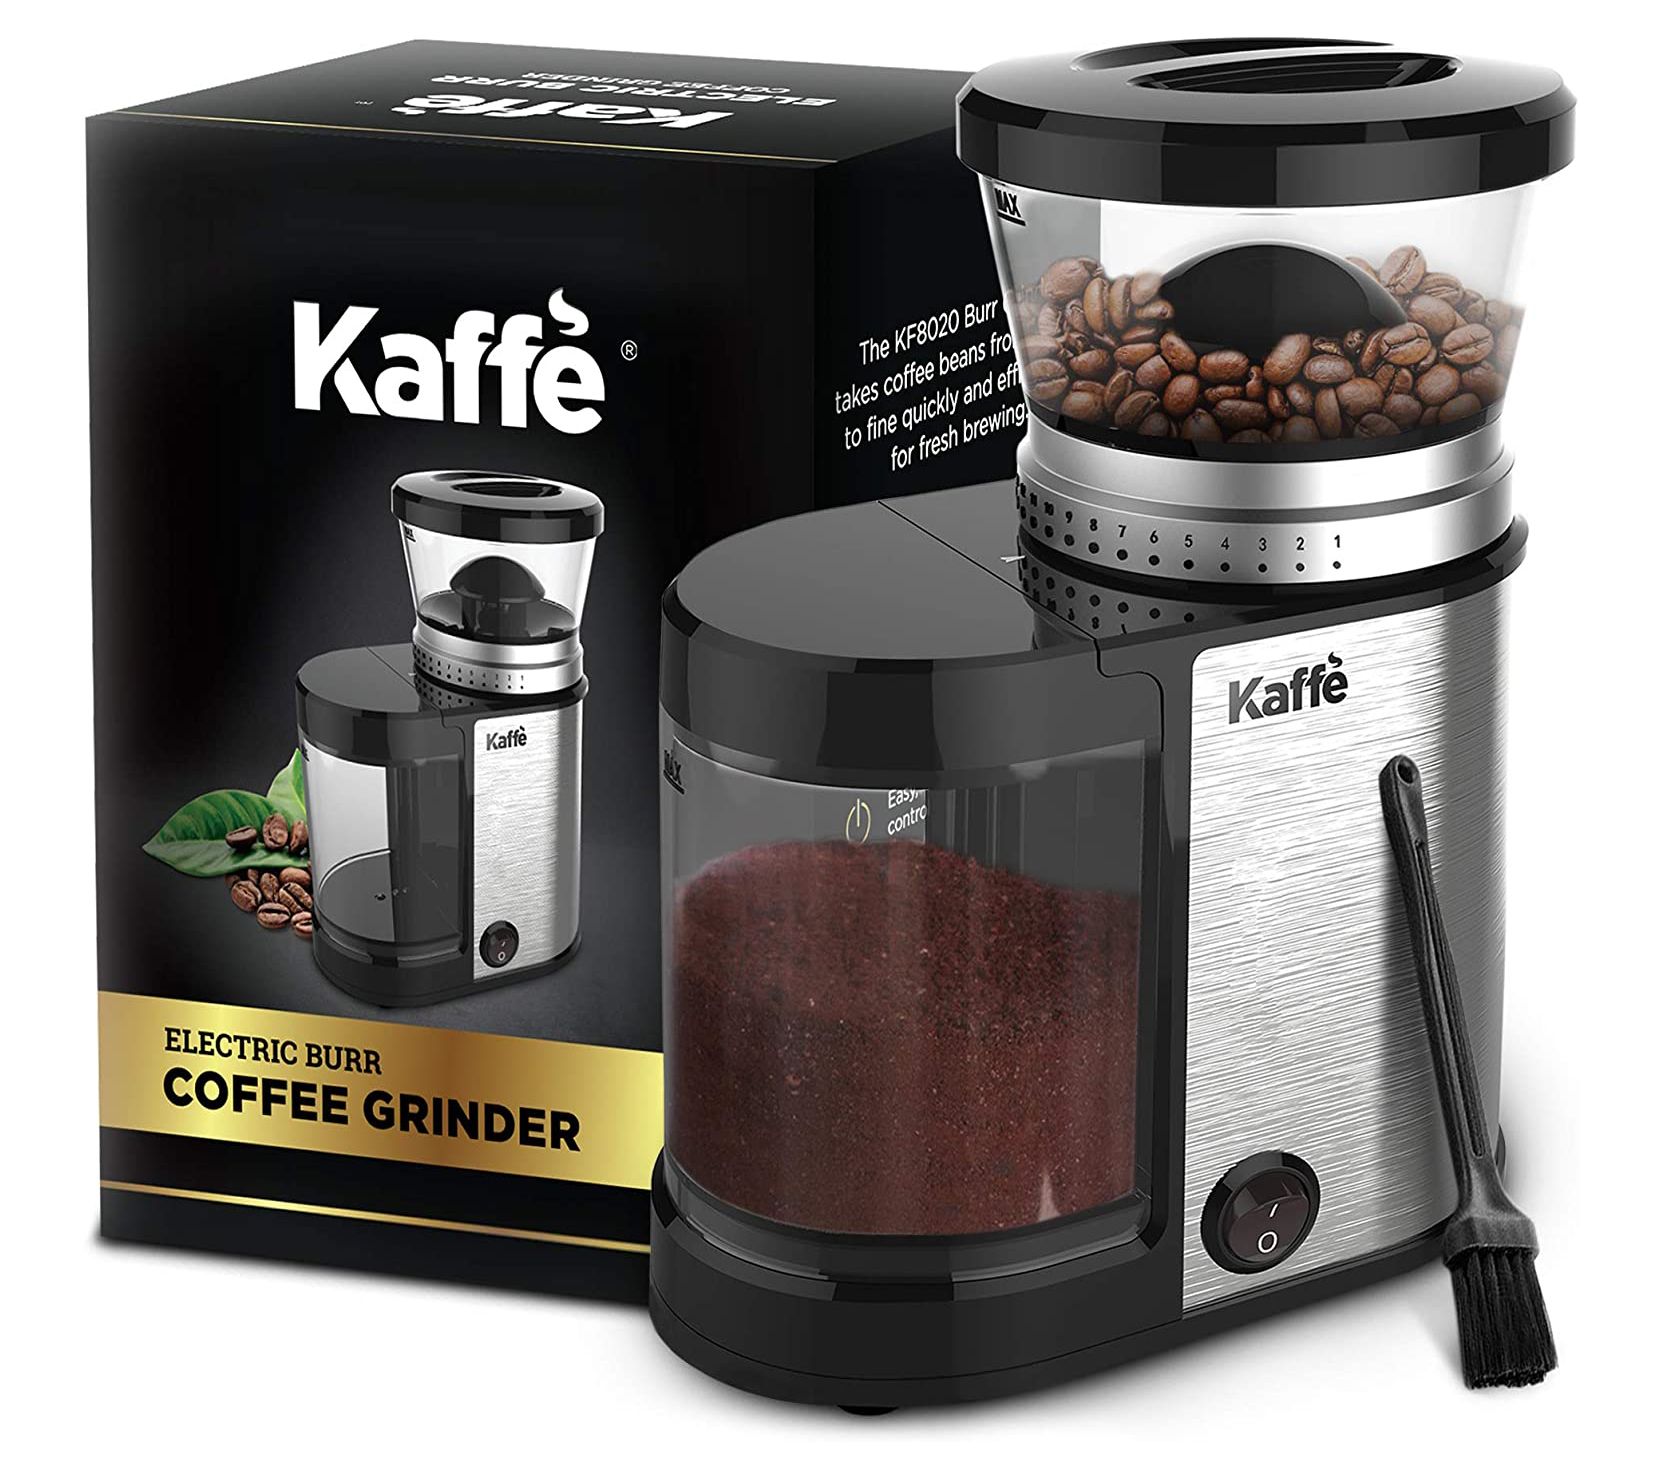 Coffee Grinder - Mr Coffee Automatic Burr Mill Grinder for Sale in